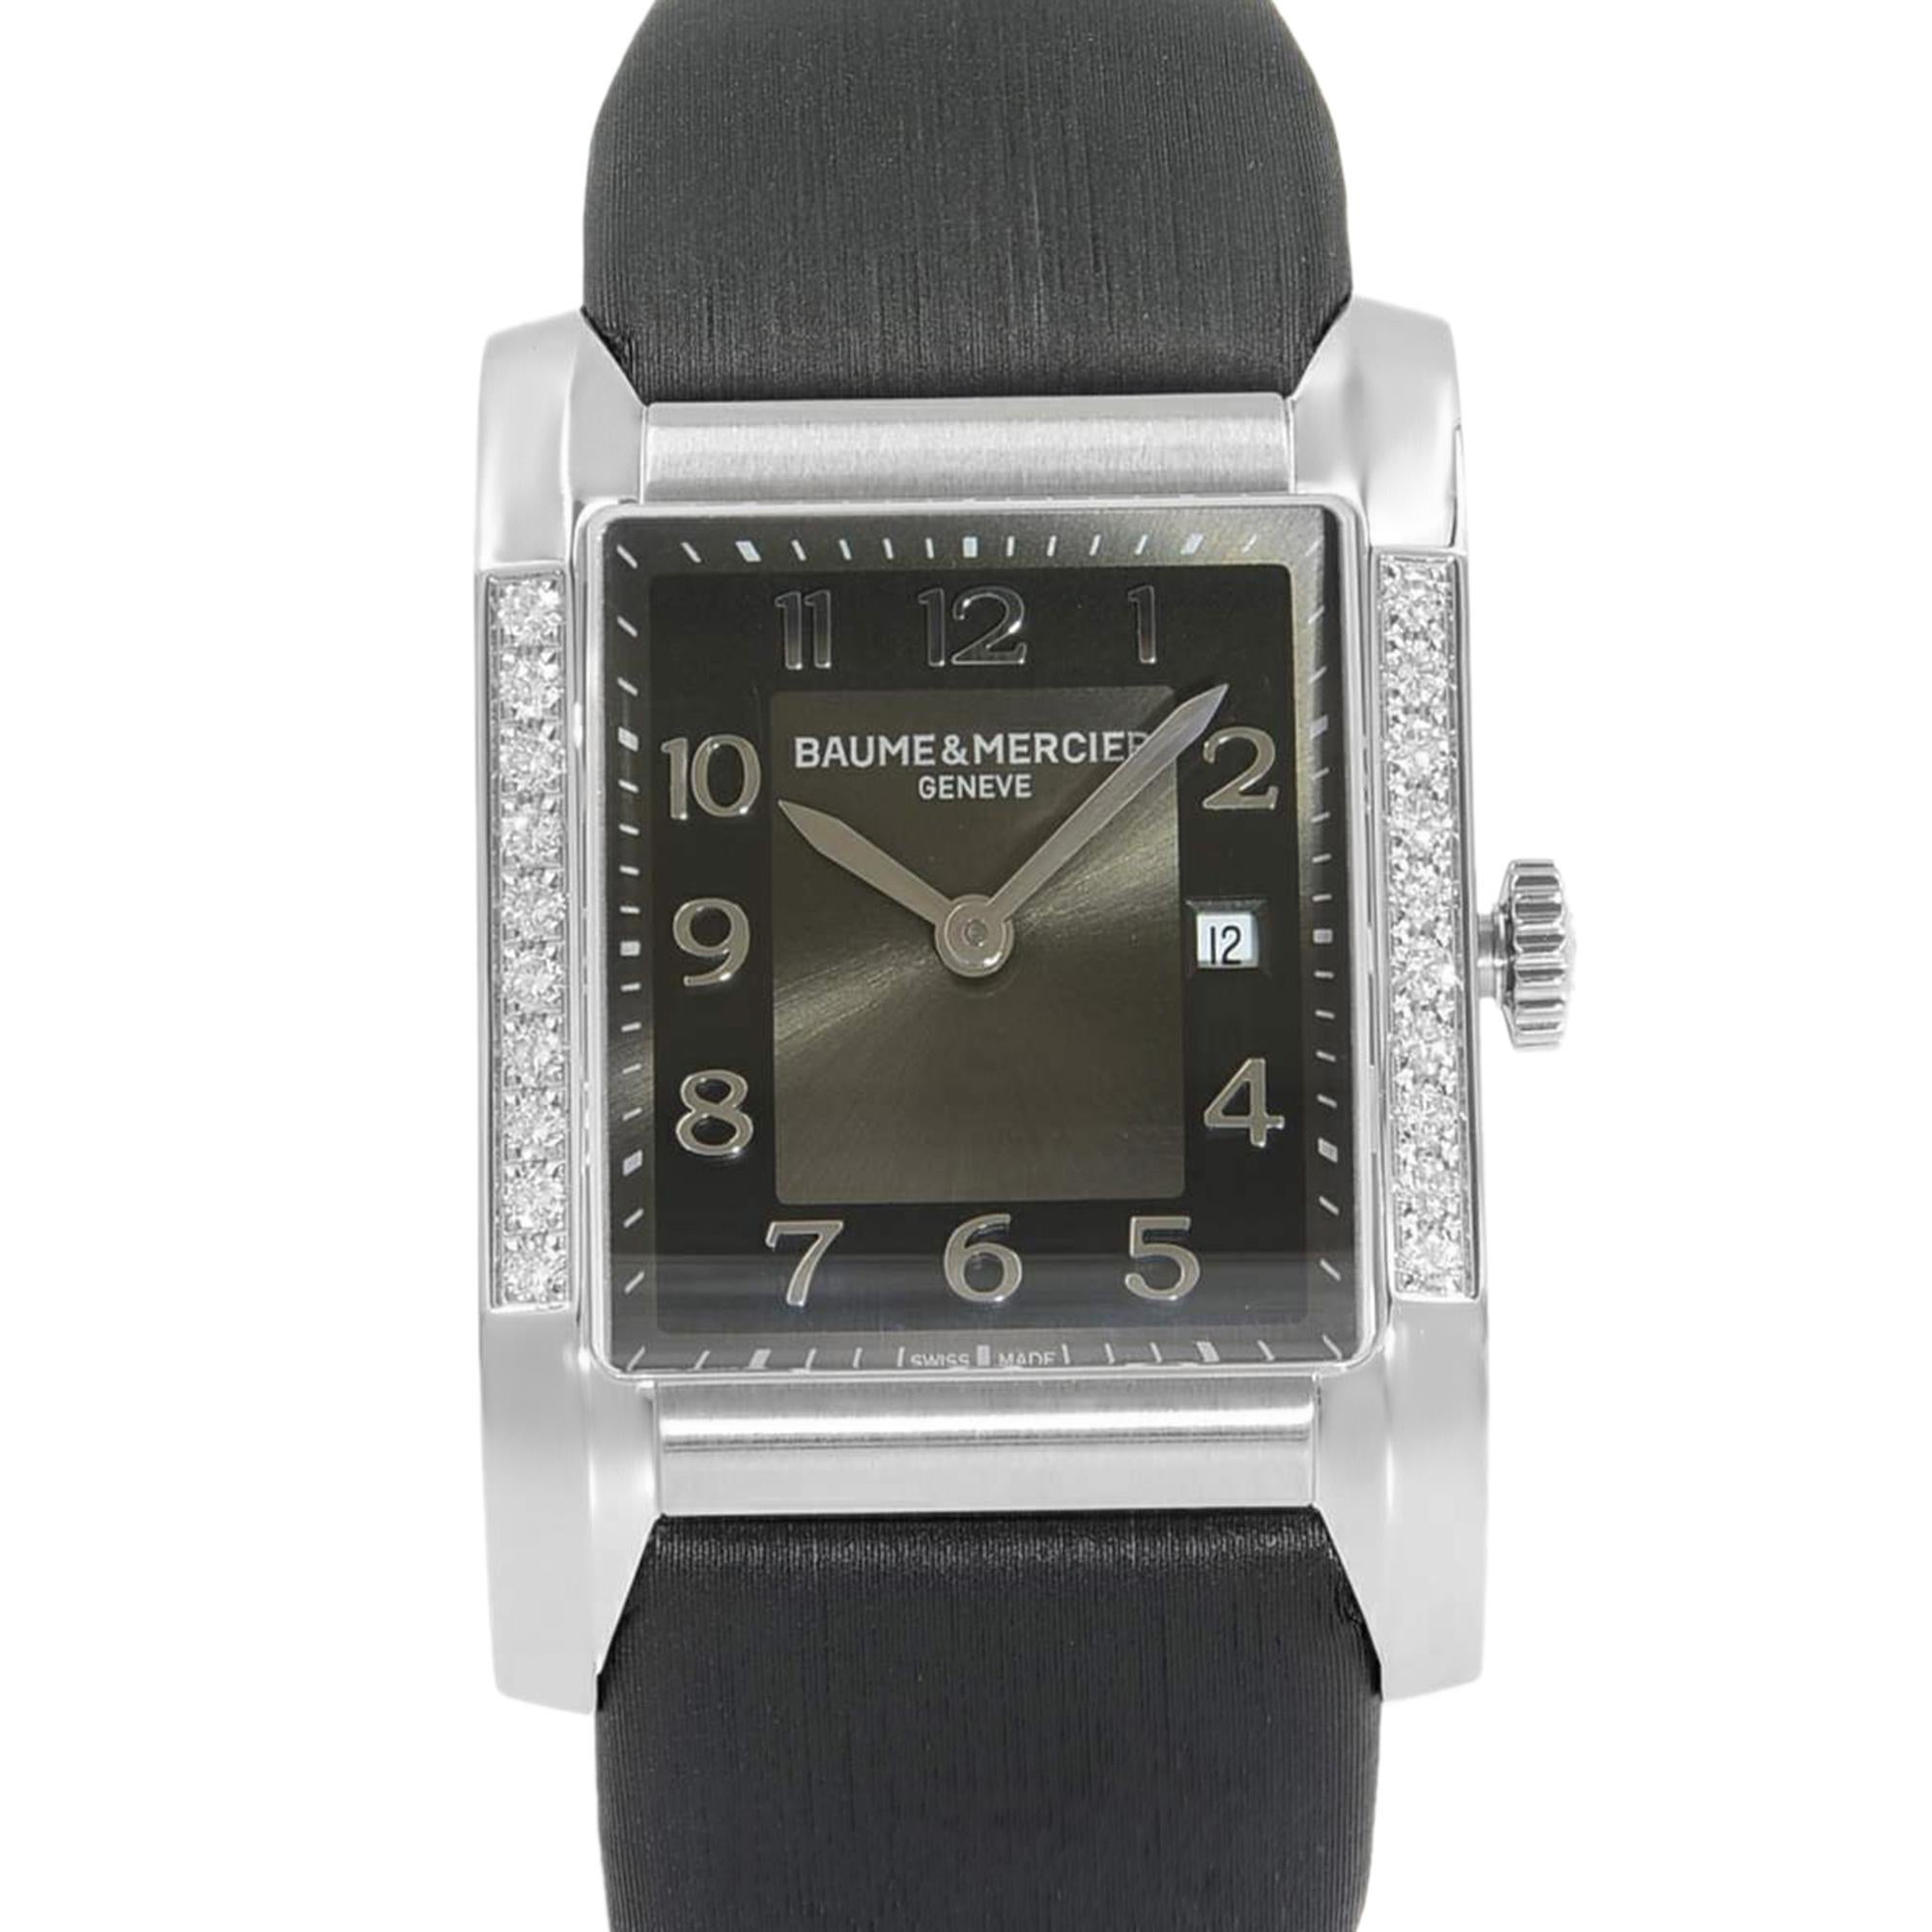 This  never been worn  Baume et Mercier Hampton  10022 is a beautiful Ladies timepiece that is powered by a quartz movement which is cased in a stainless steel case. It has a  rectangle shape face, date, diamonds dial and has hand arabic numerals